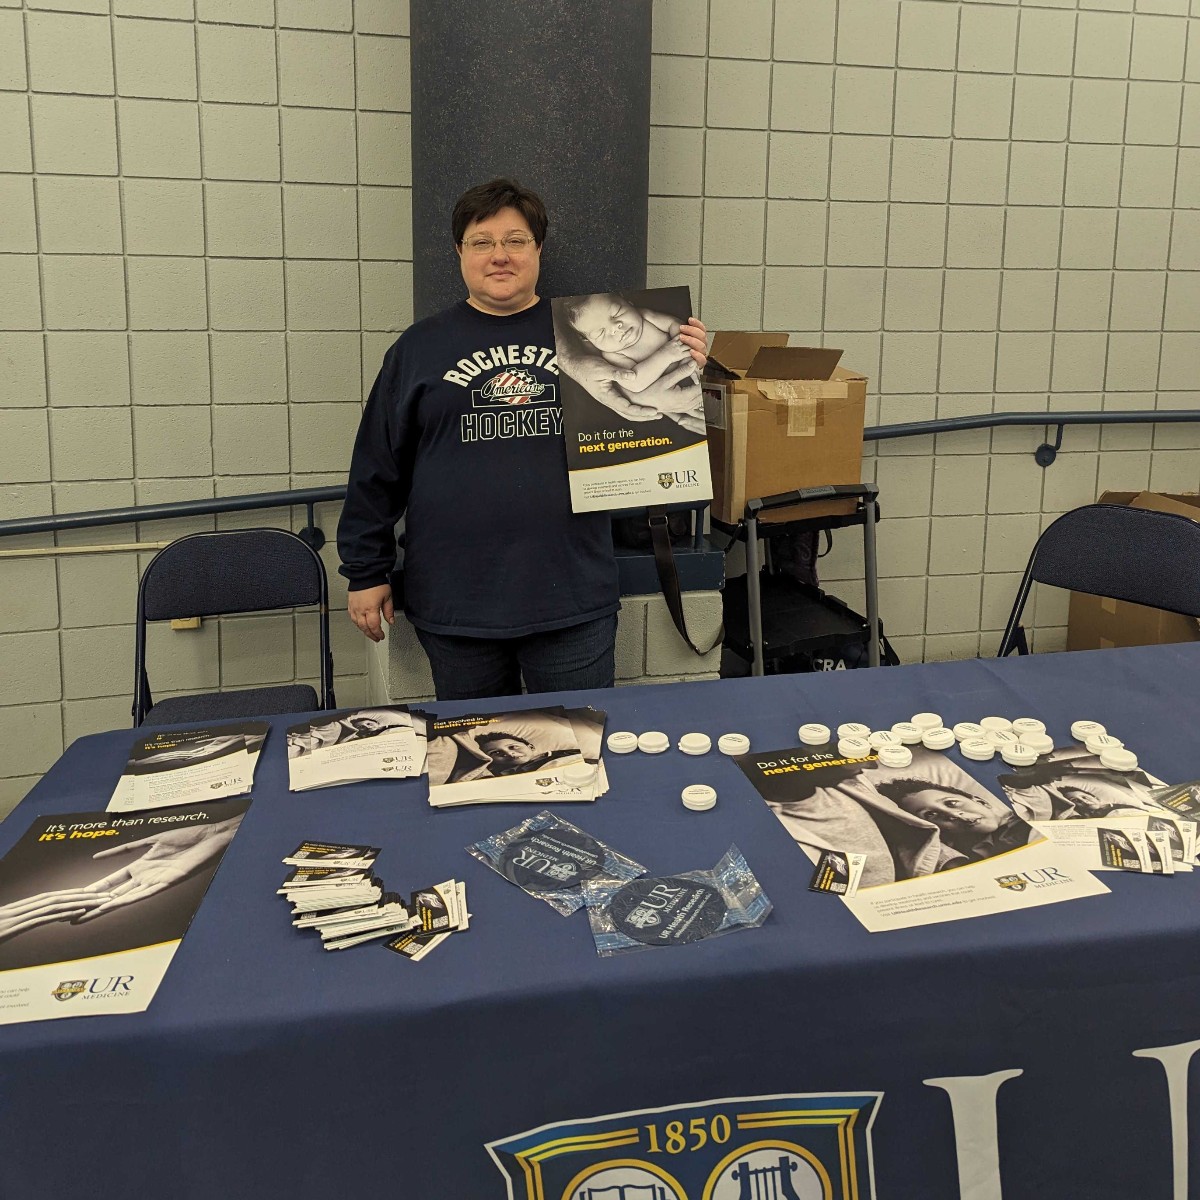 UR CTSI Director of Research Services Carrie Dykes, PhD, shared information with the community on how to participate in health research while cheering on @AmerksHockey on Friday night! Want to participate in #URochesterResearch? Check out URHealthResearch.urmc.edu.